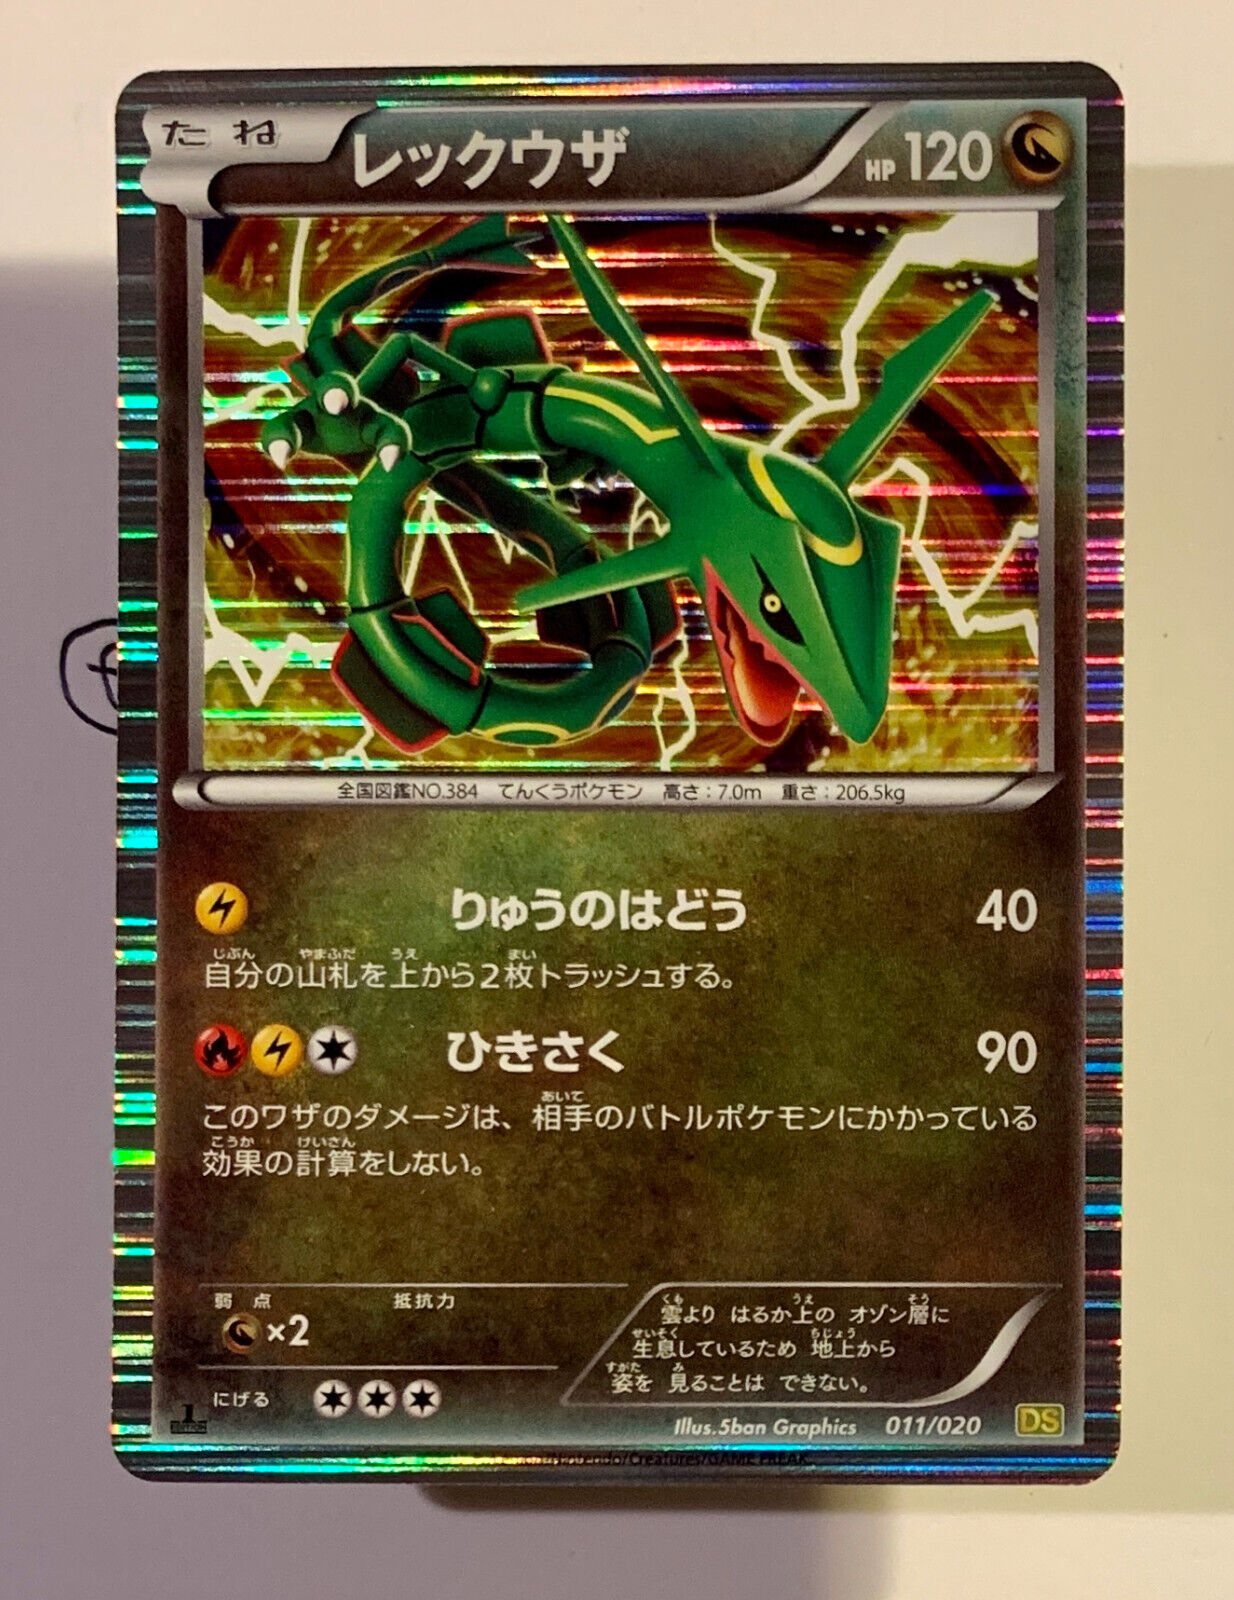 Pokemon Rayquaza 011/020 1st Edition Holo DS Japan